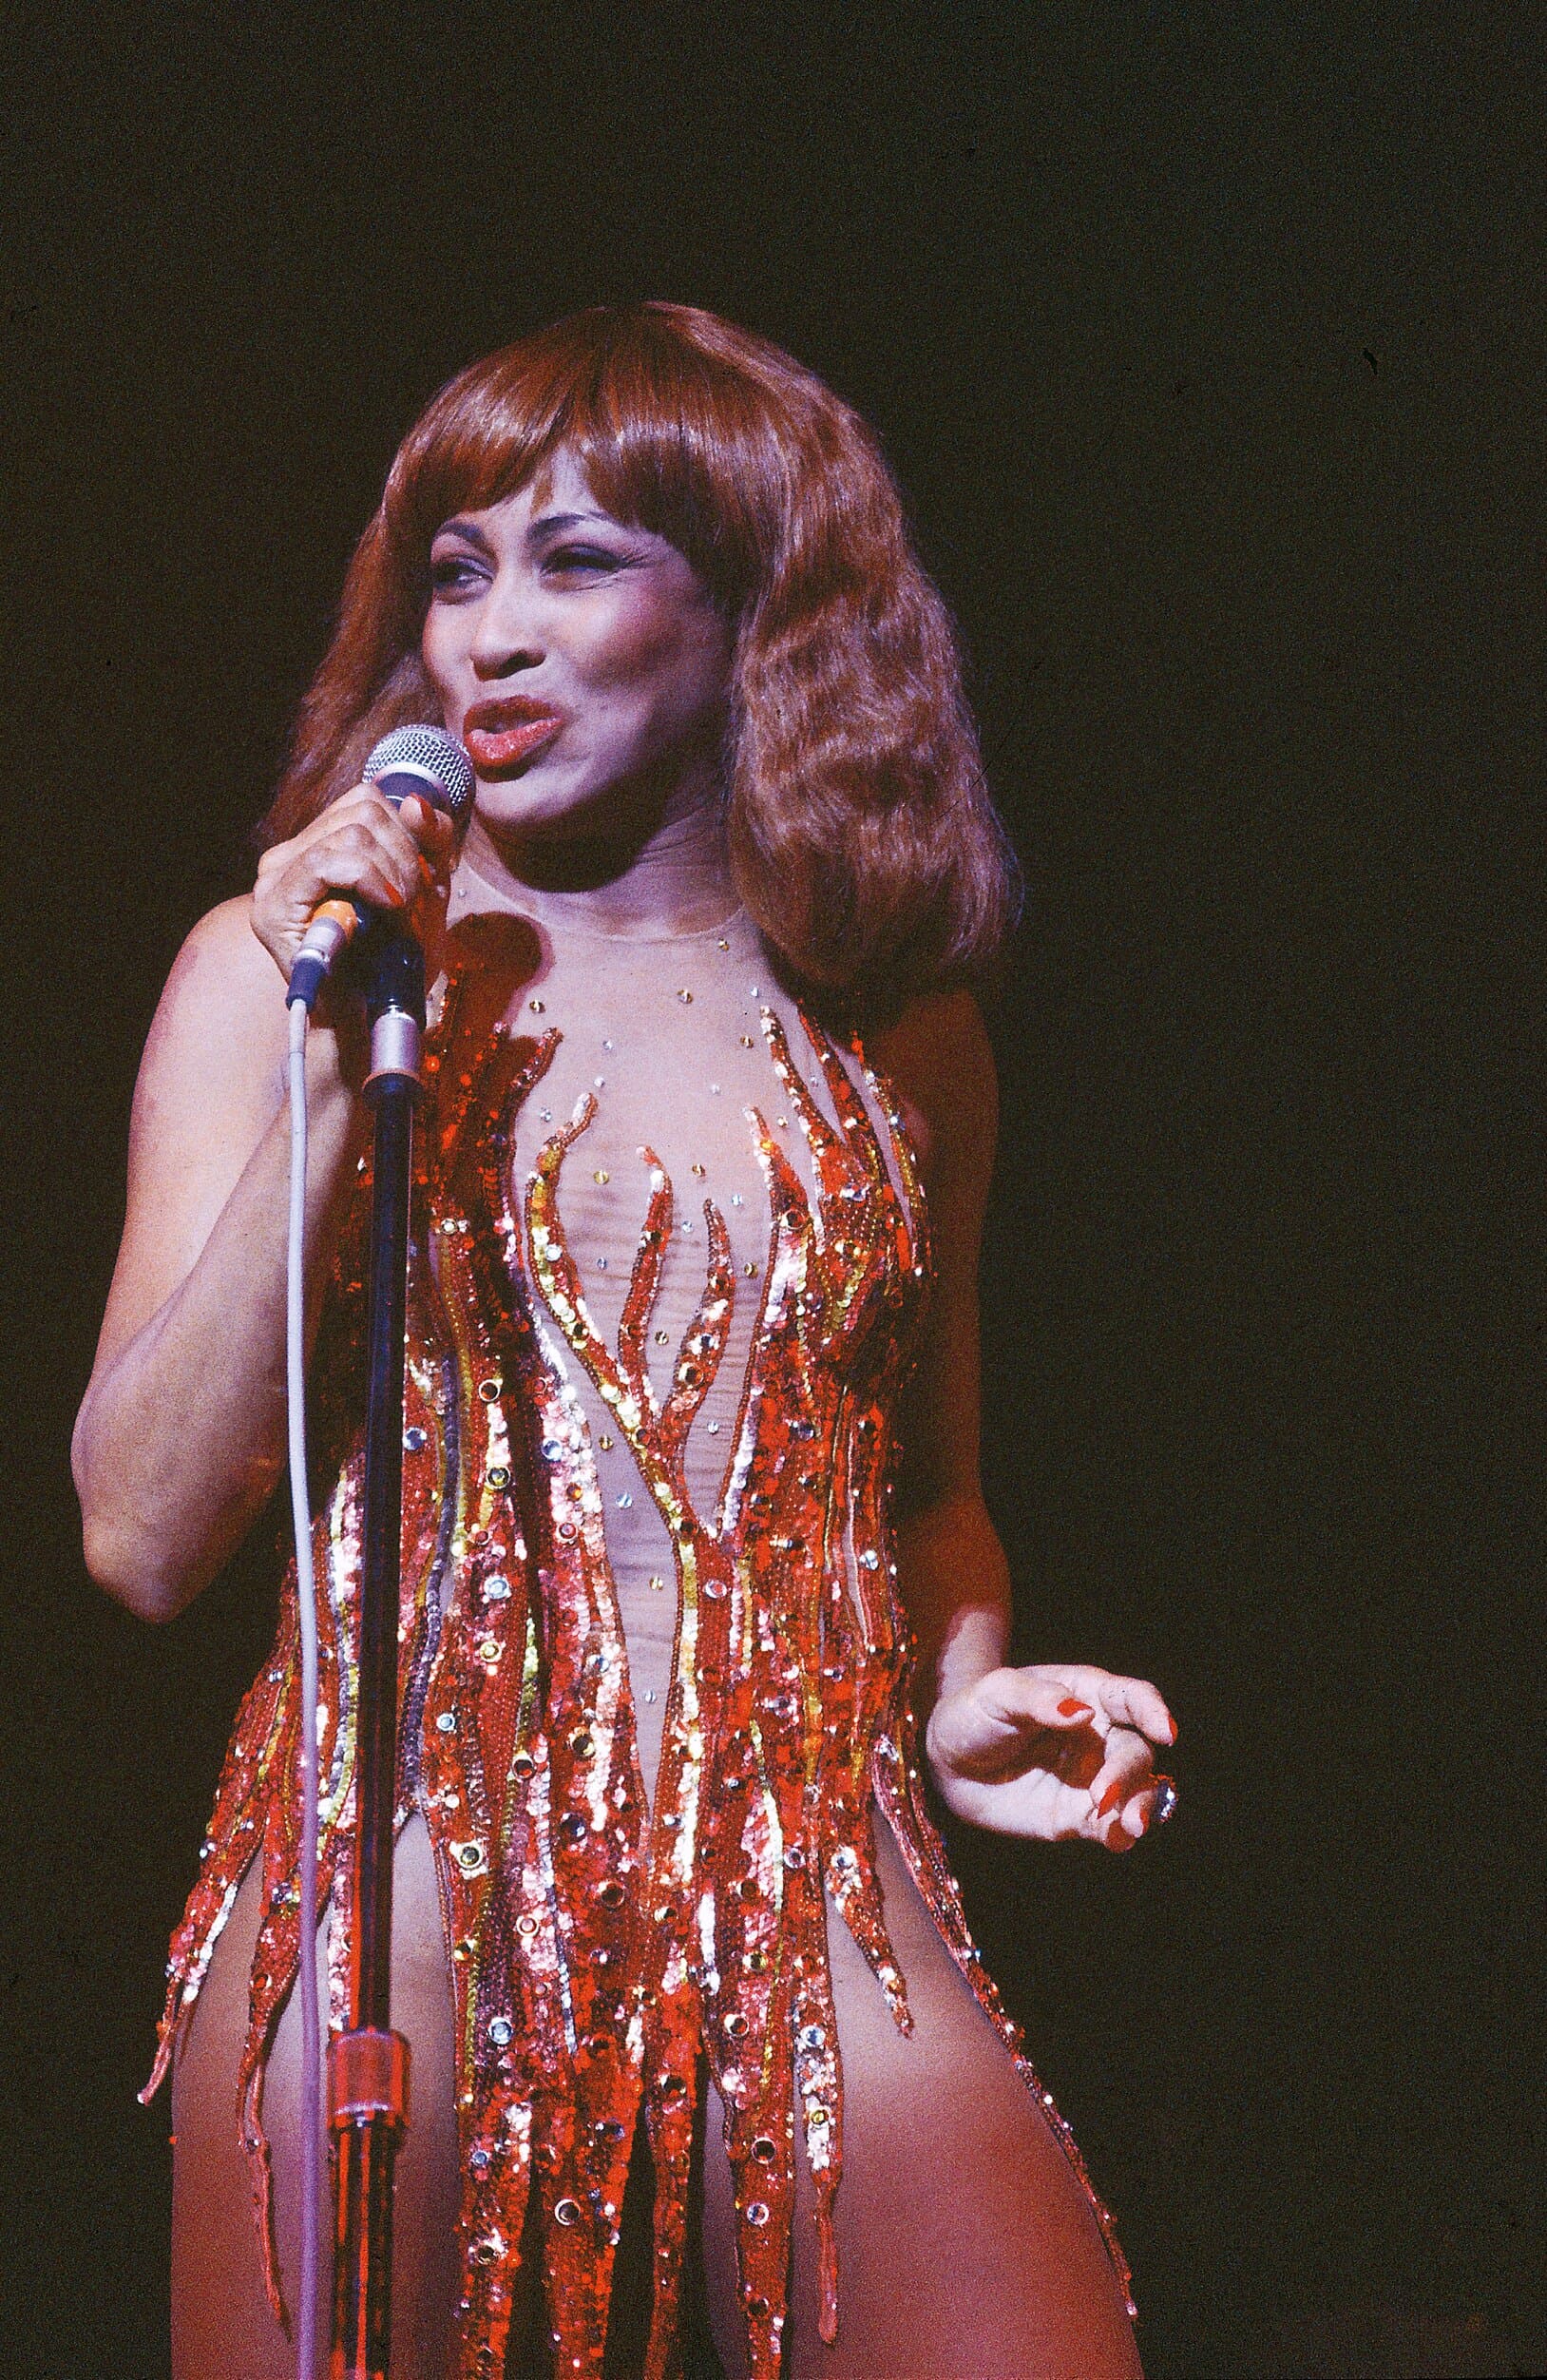 Tina Turner wearing the Flame dress designed by Bob Mackie (1980). Photo by Gai Terrell, Redferns. Getty Images